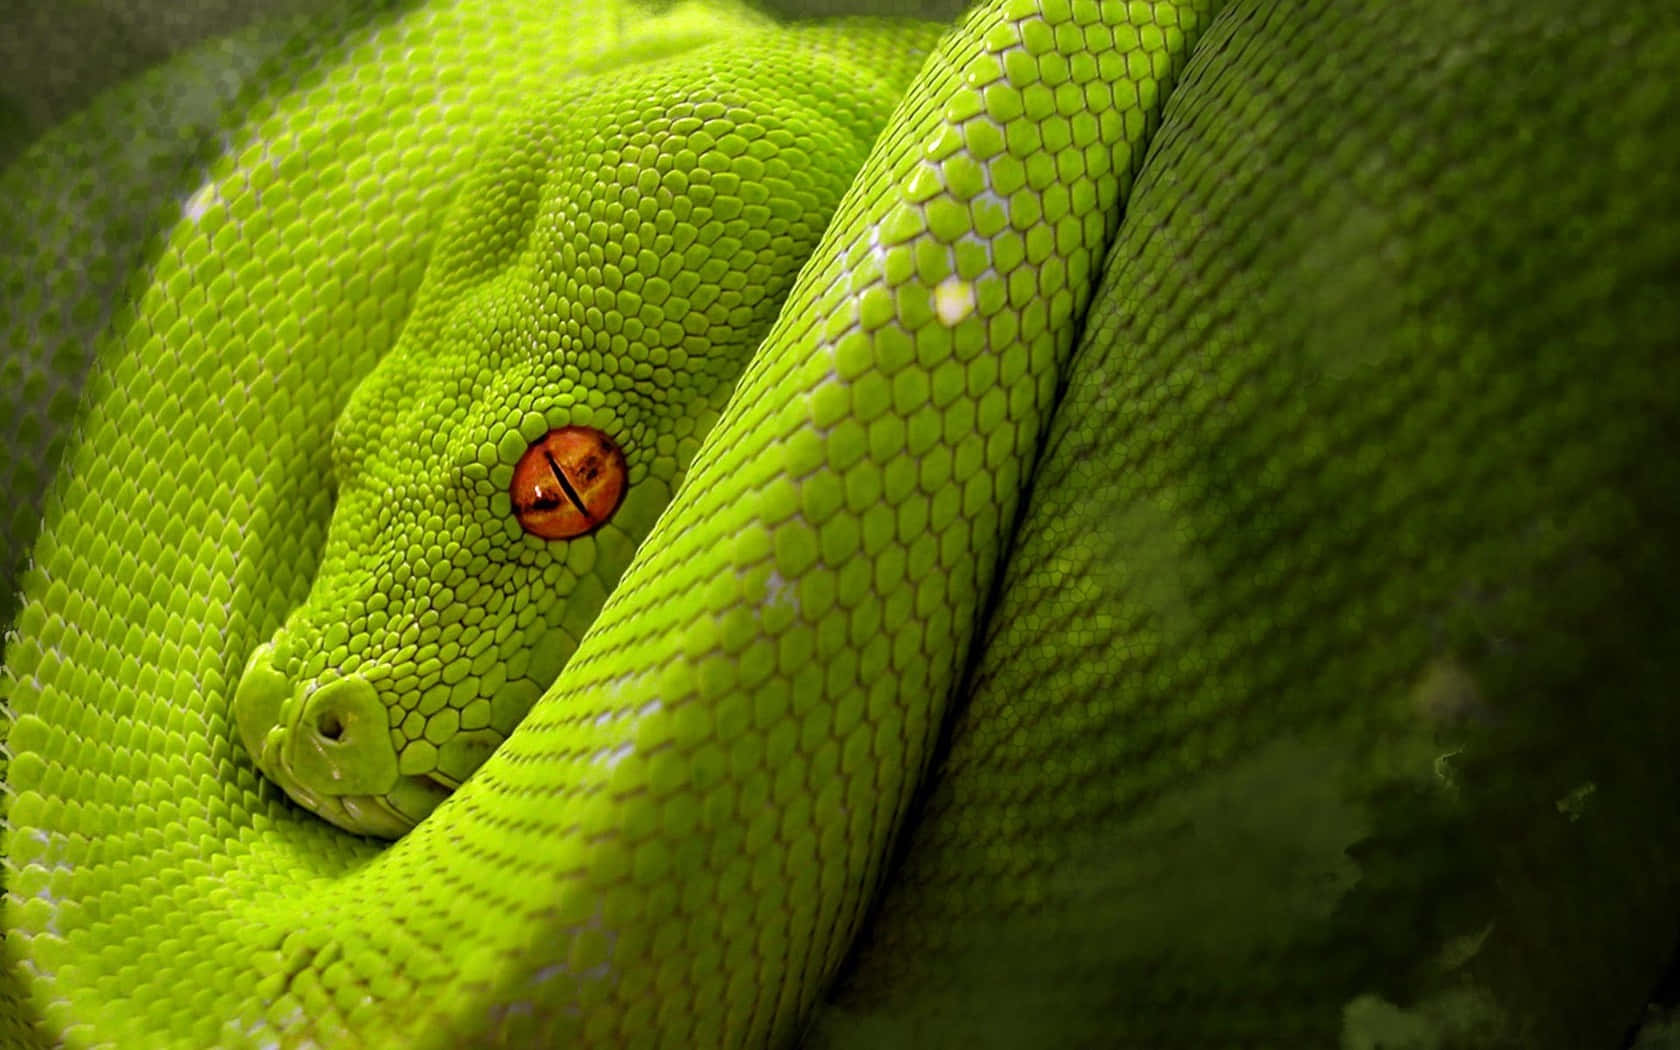 A Green Snake With Red Eyes Is Curled Up